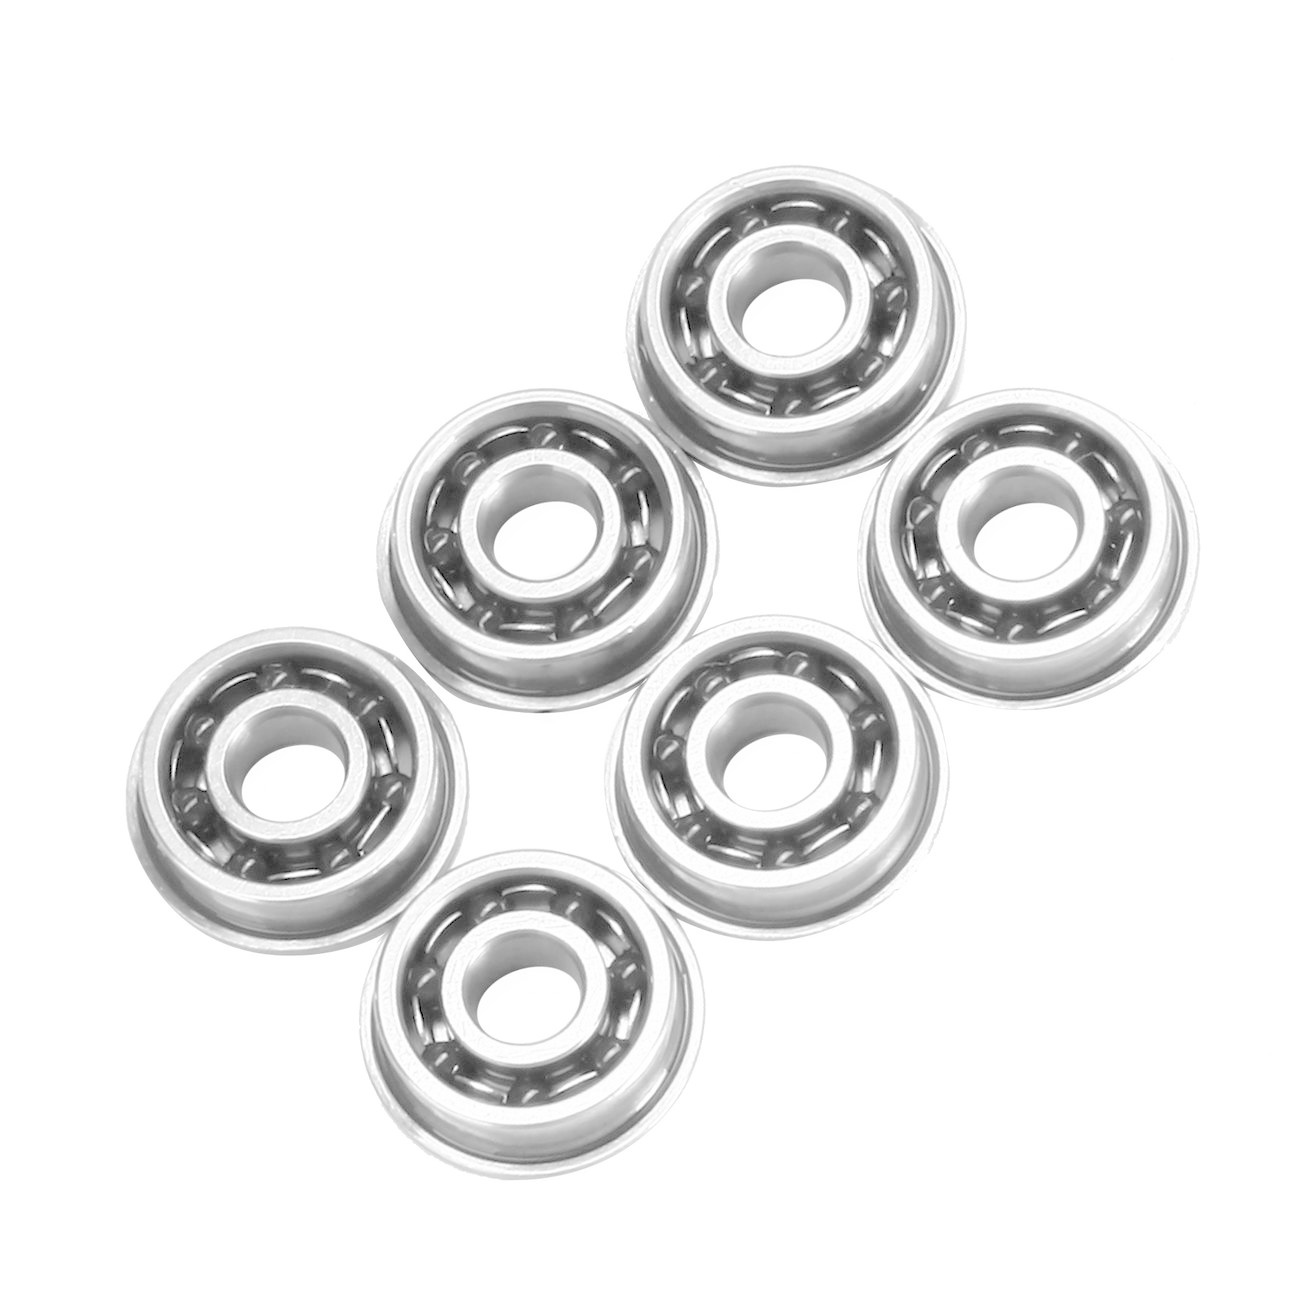 ASG Ultimate Ceramic Ball bearings 8 mm - 6 pieces